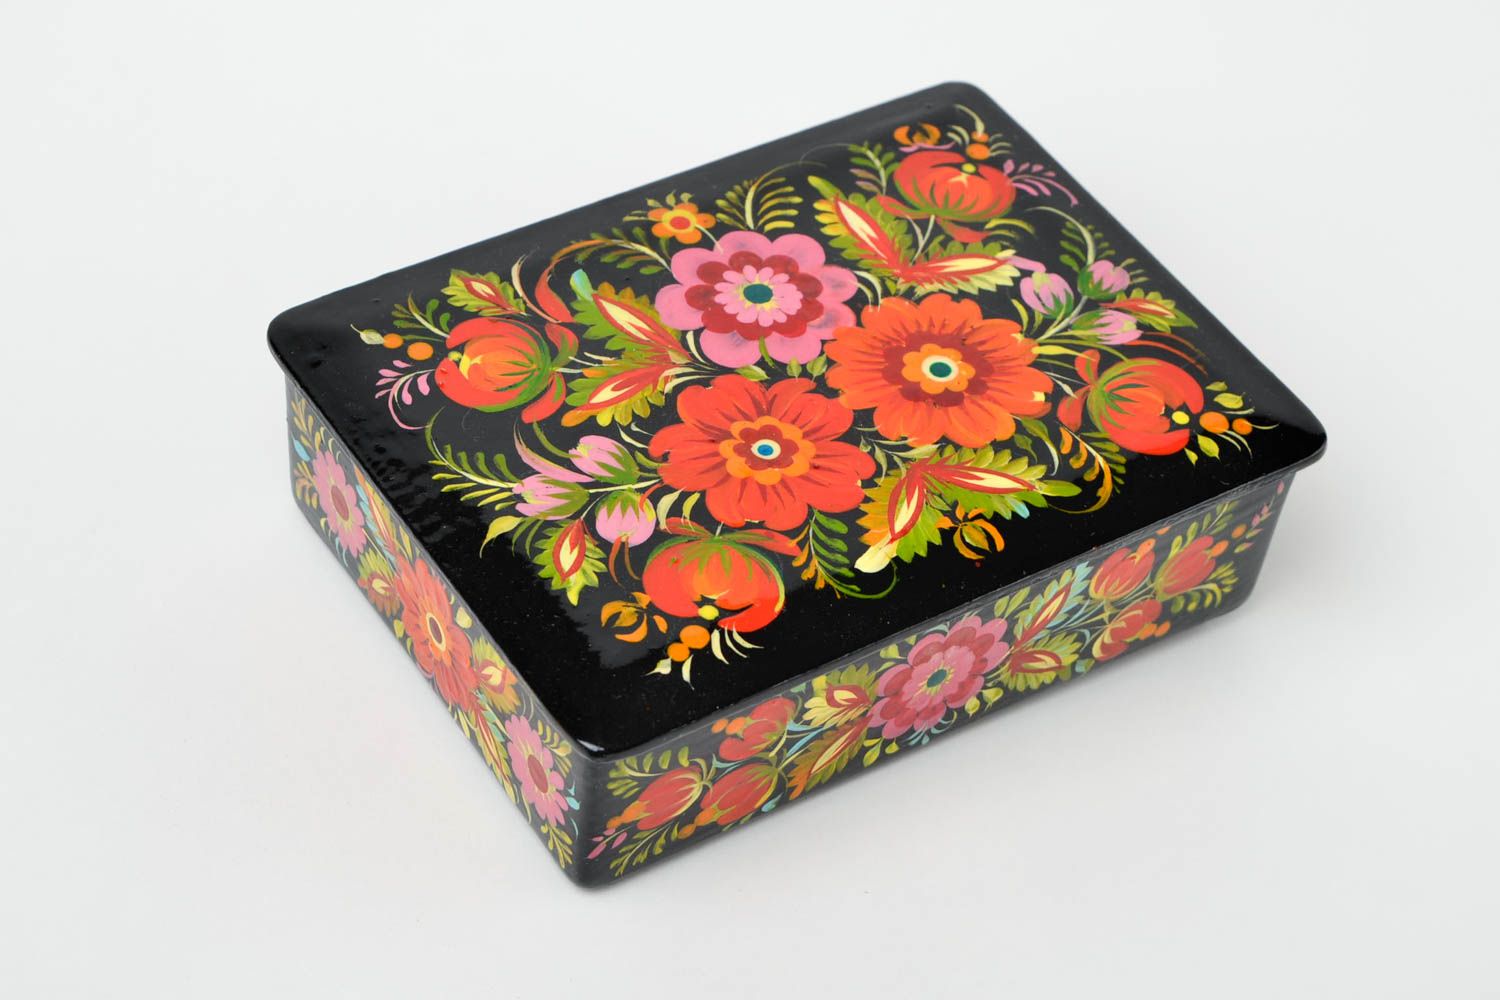 Homemade jewelry boxes for women jewellery box wooden gifts rustic home decor photo 4